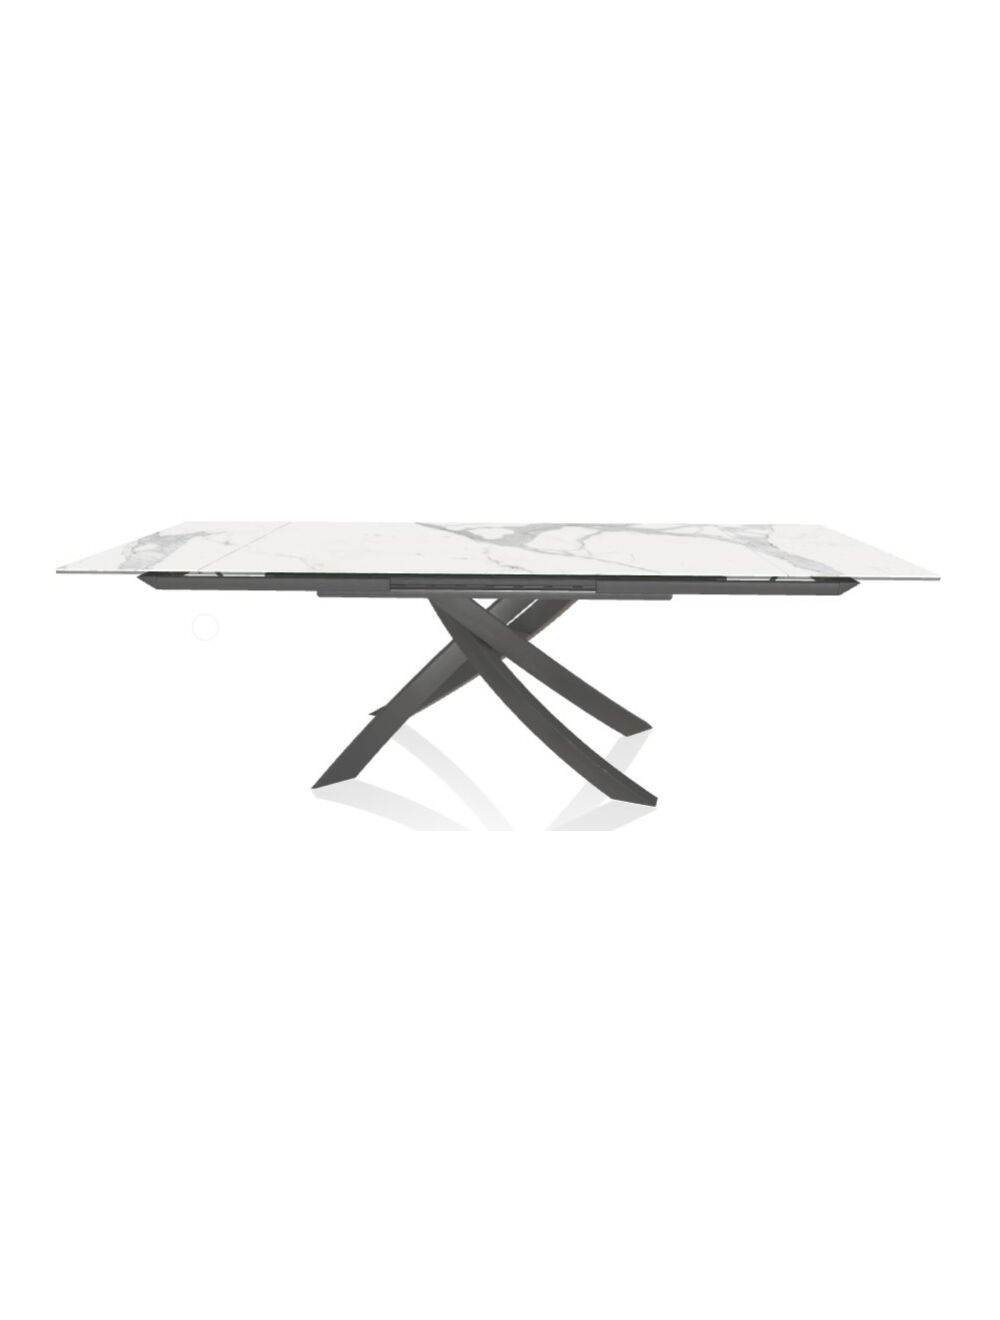 CLEARANCE - 65% DISCOUNT - 1 X FAULTY BONTEMPI ARTISTICO 160CM DINING TABLE EXTENDING TO 240CM - SUPERMARBLE MATT WHITE TOP WITH GRAPHITE LEGS